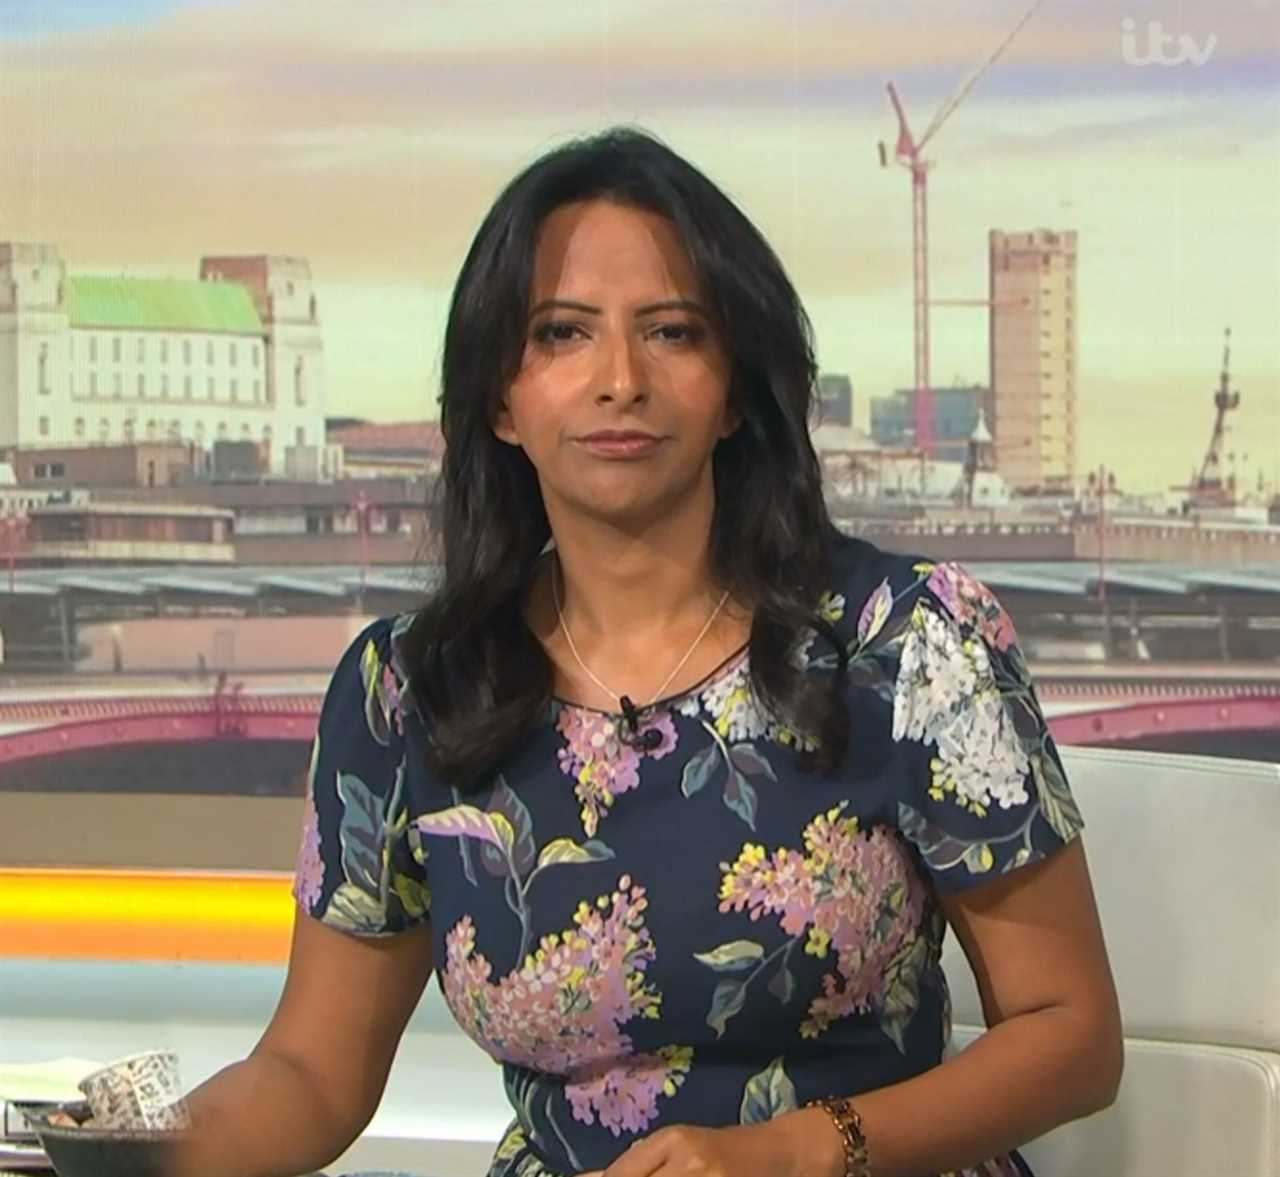 Ranvir Singh left in floods of tears in a park after being axed from job at ITV